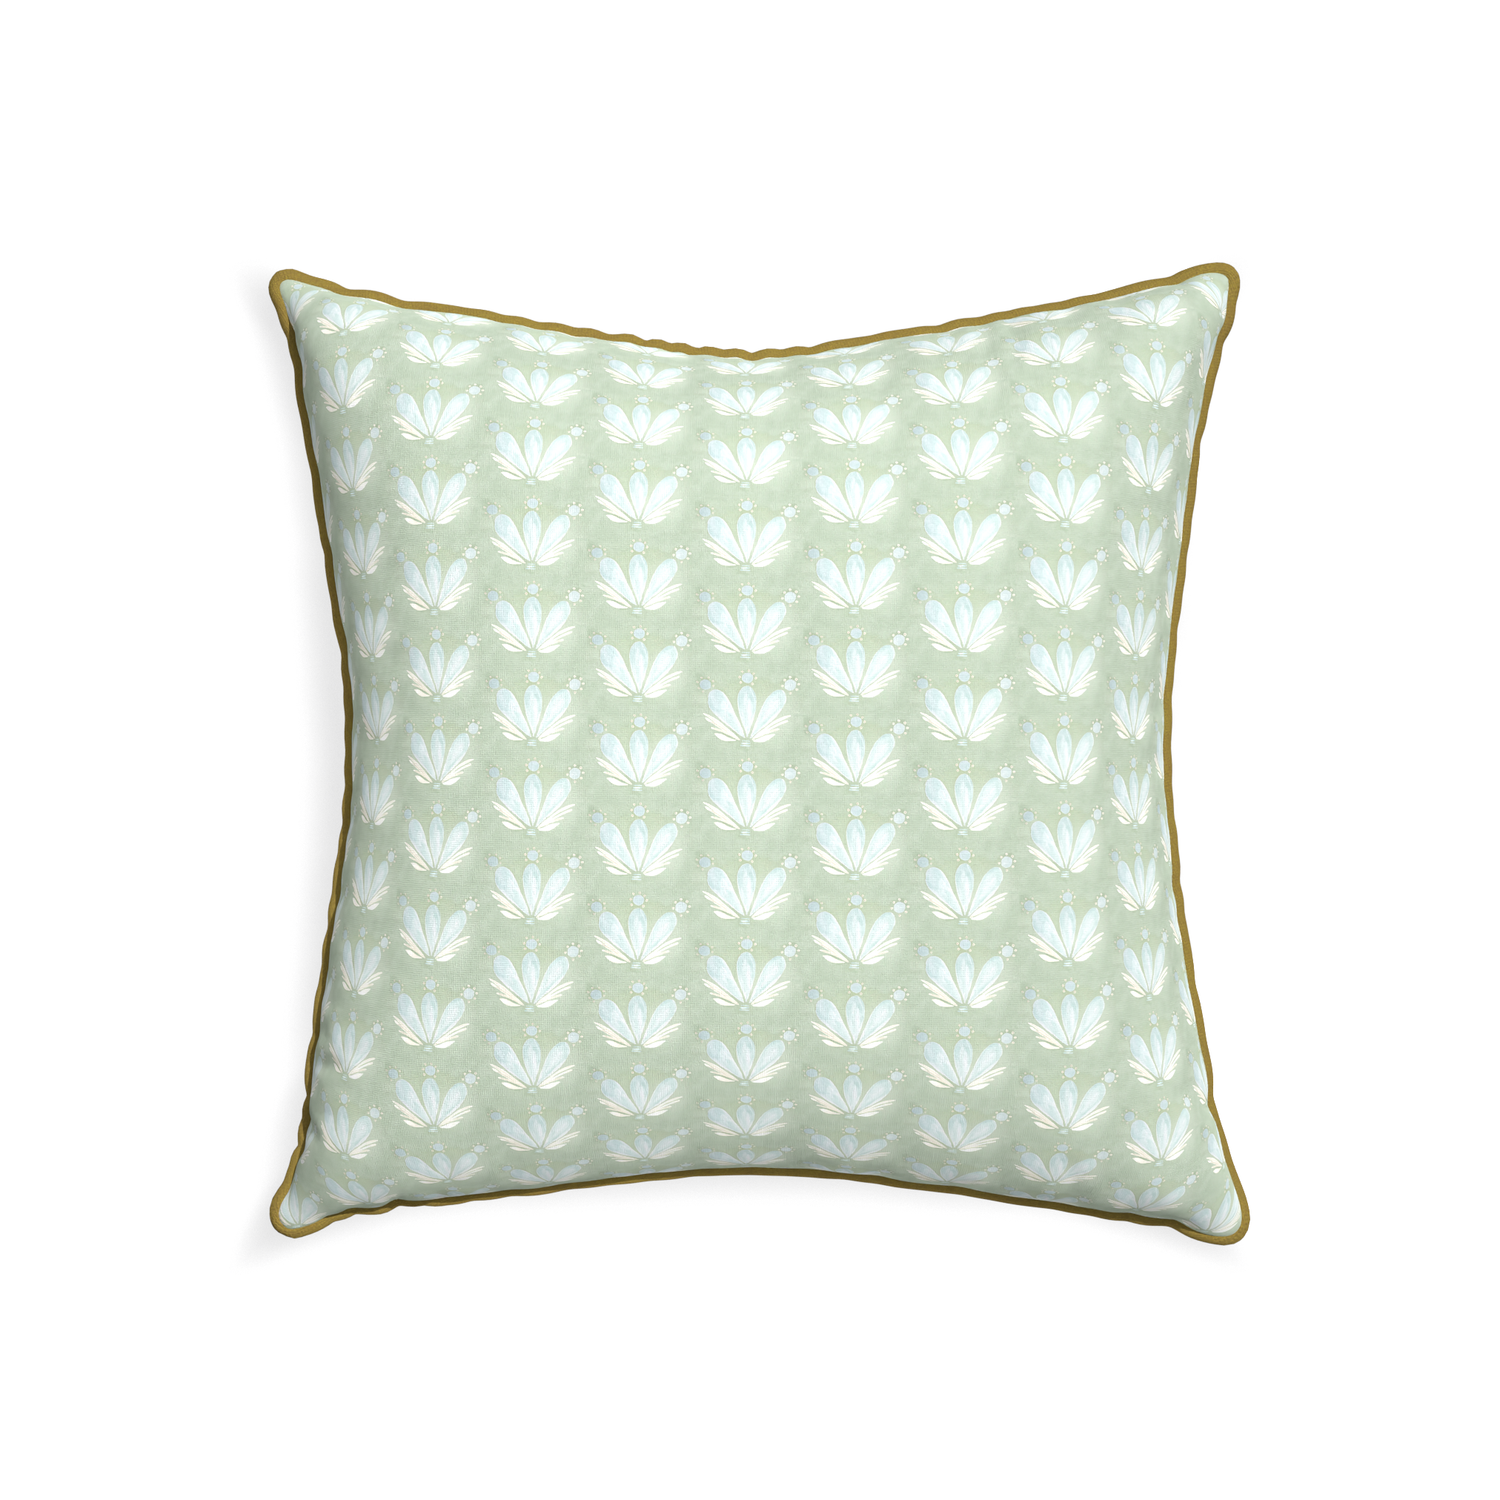 22-square serena sea salt custom blue & green floral drop repeatpillow with c piping on white background